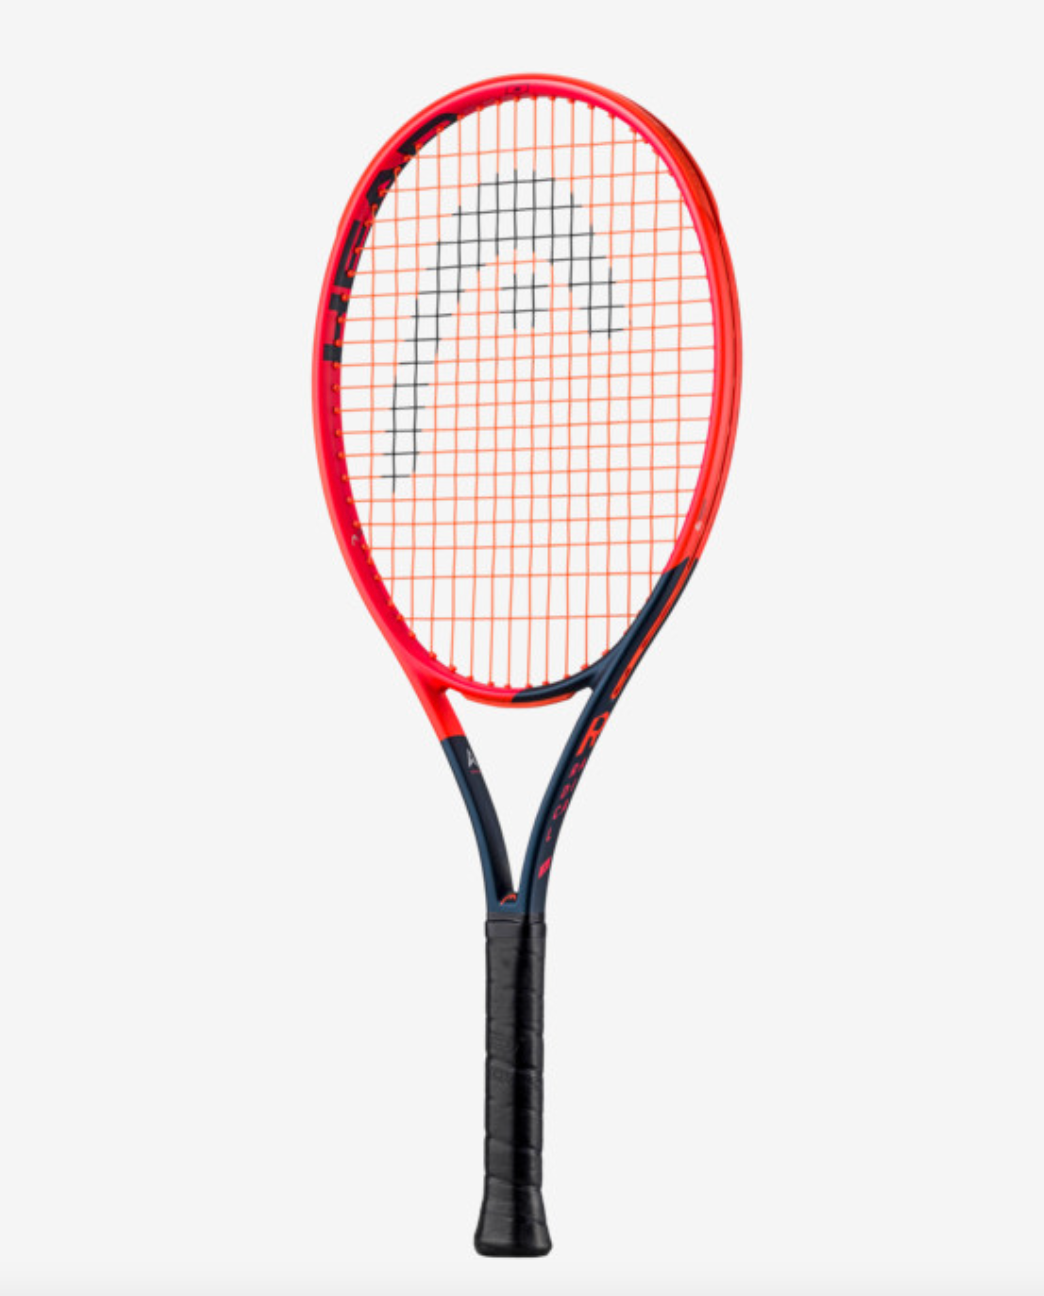 The HEAD Radical Junior 26 Tennis Racquet helps kids start their tennis journey in the most comfortable way. 